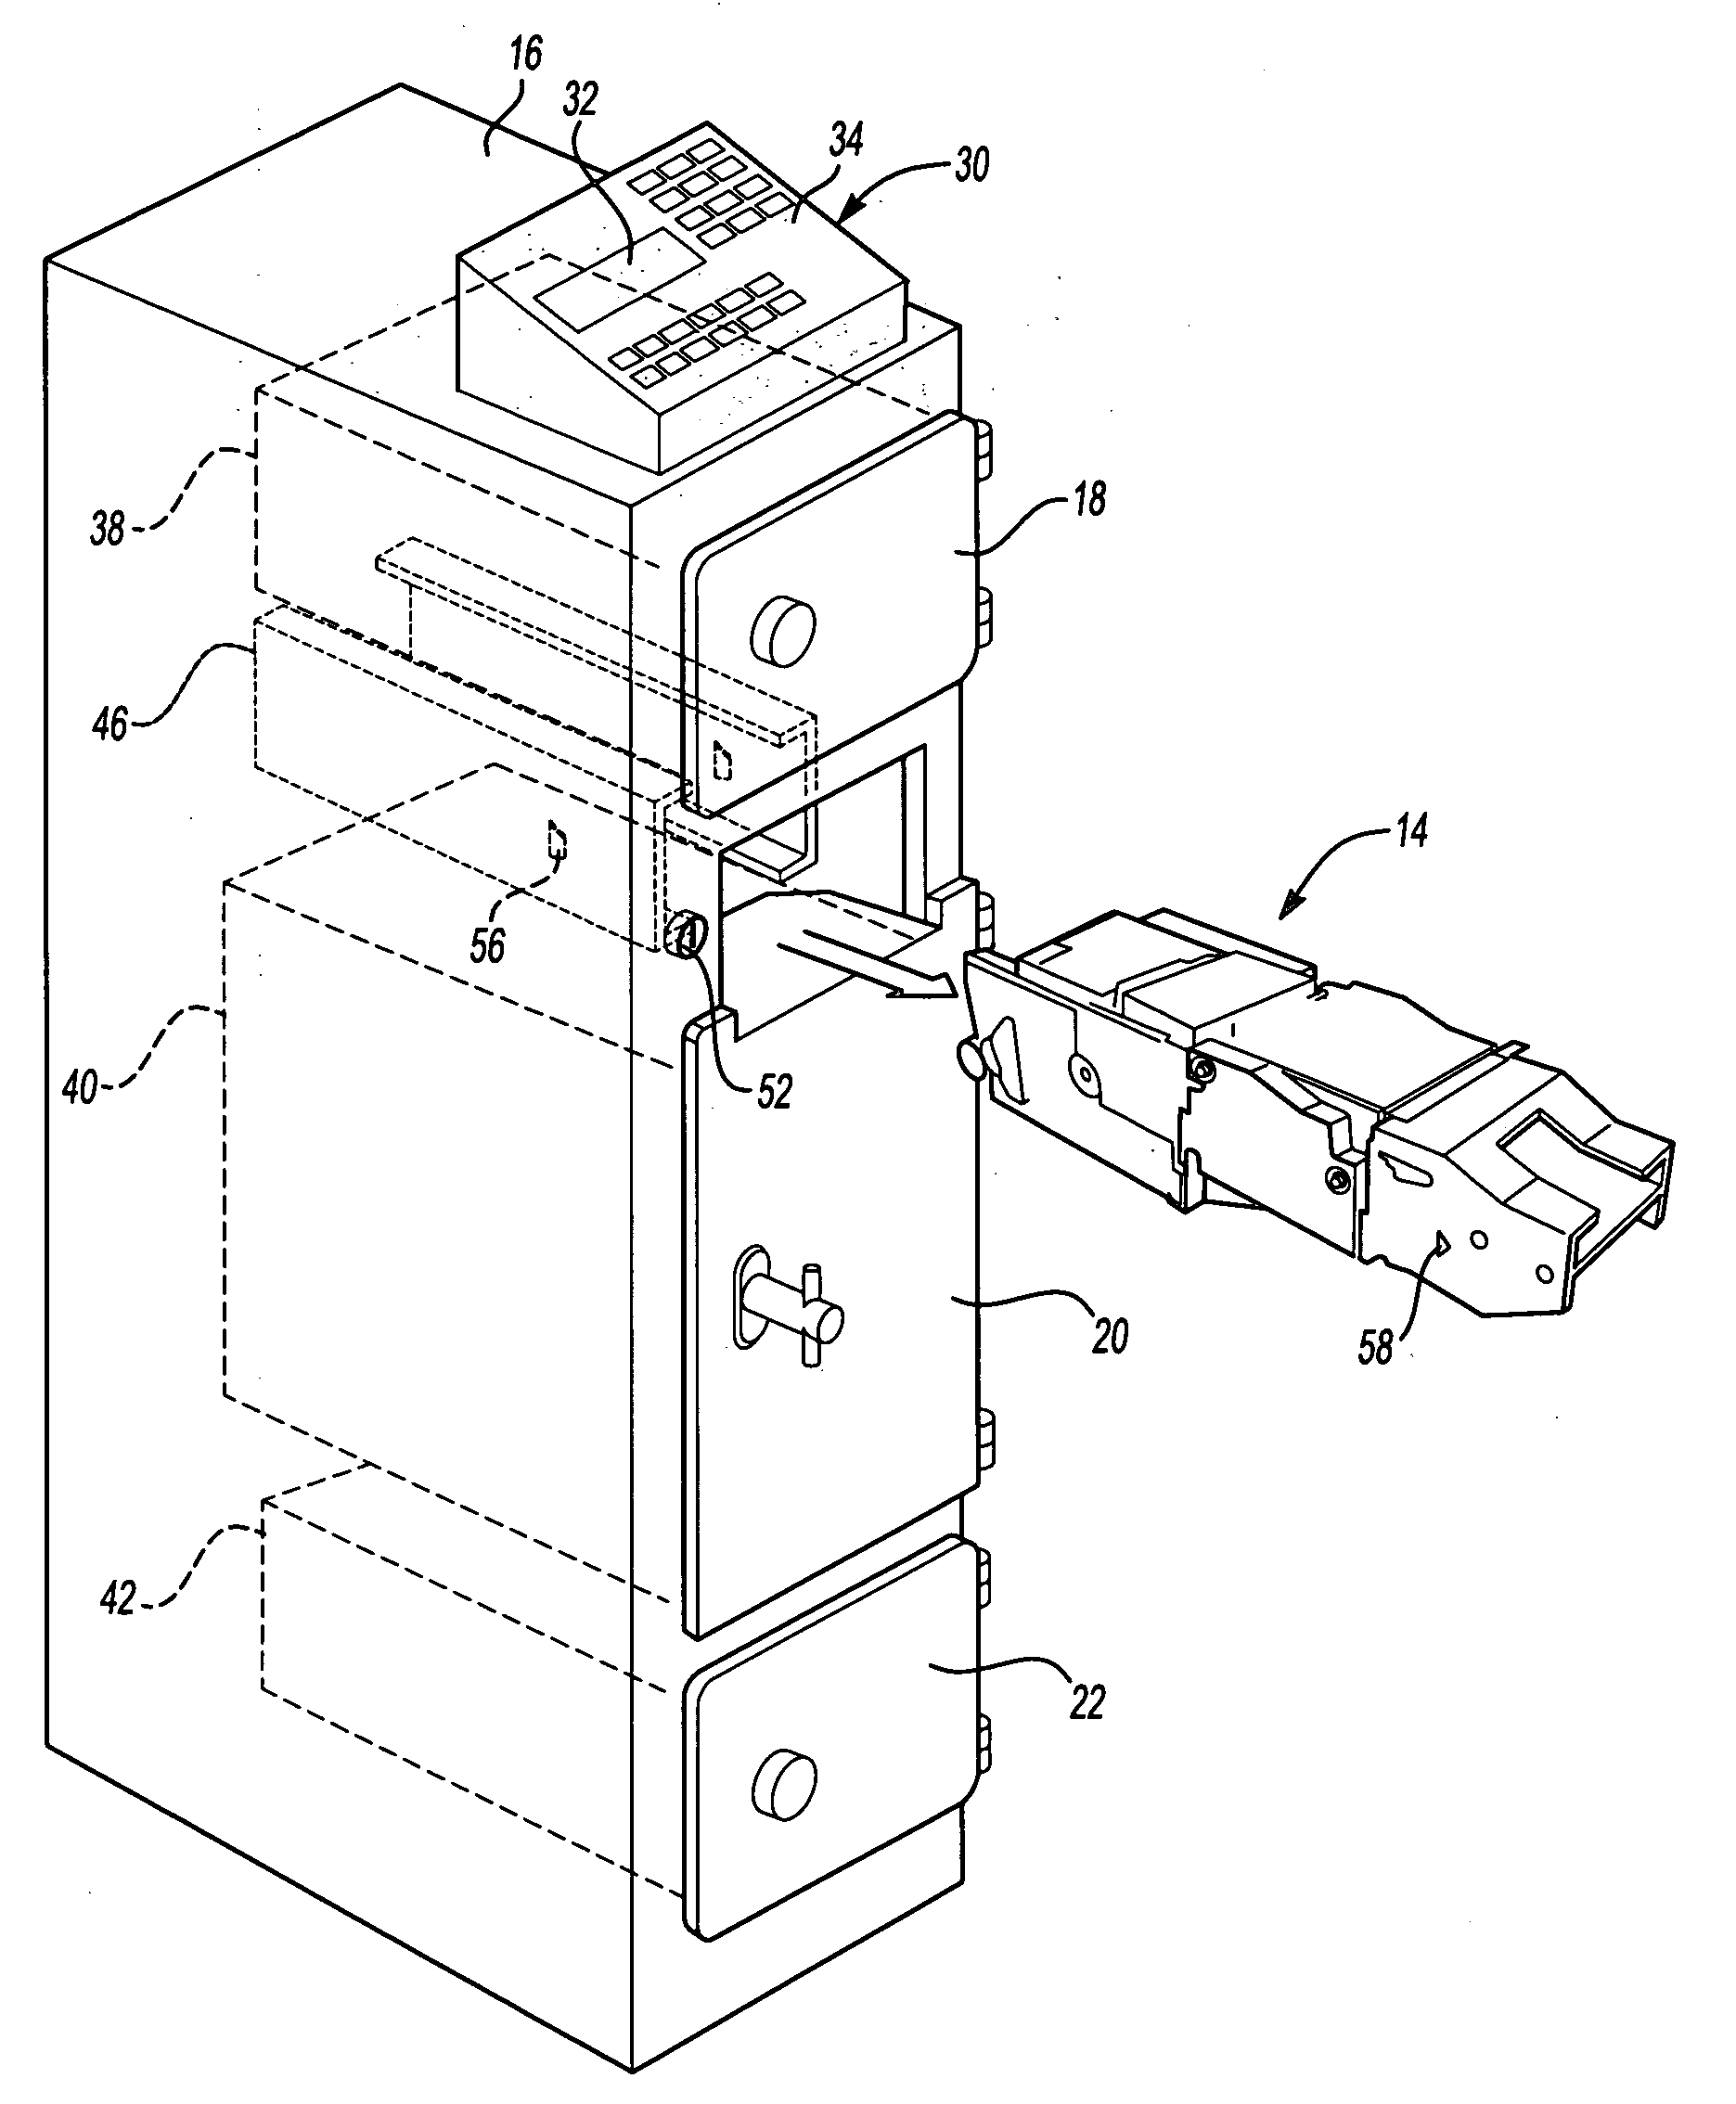 Apparatus having a bill validator and a method of servicing the apparatus